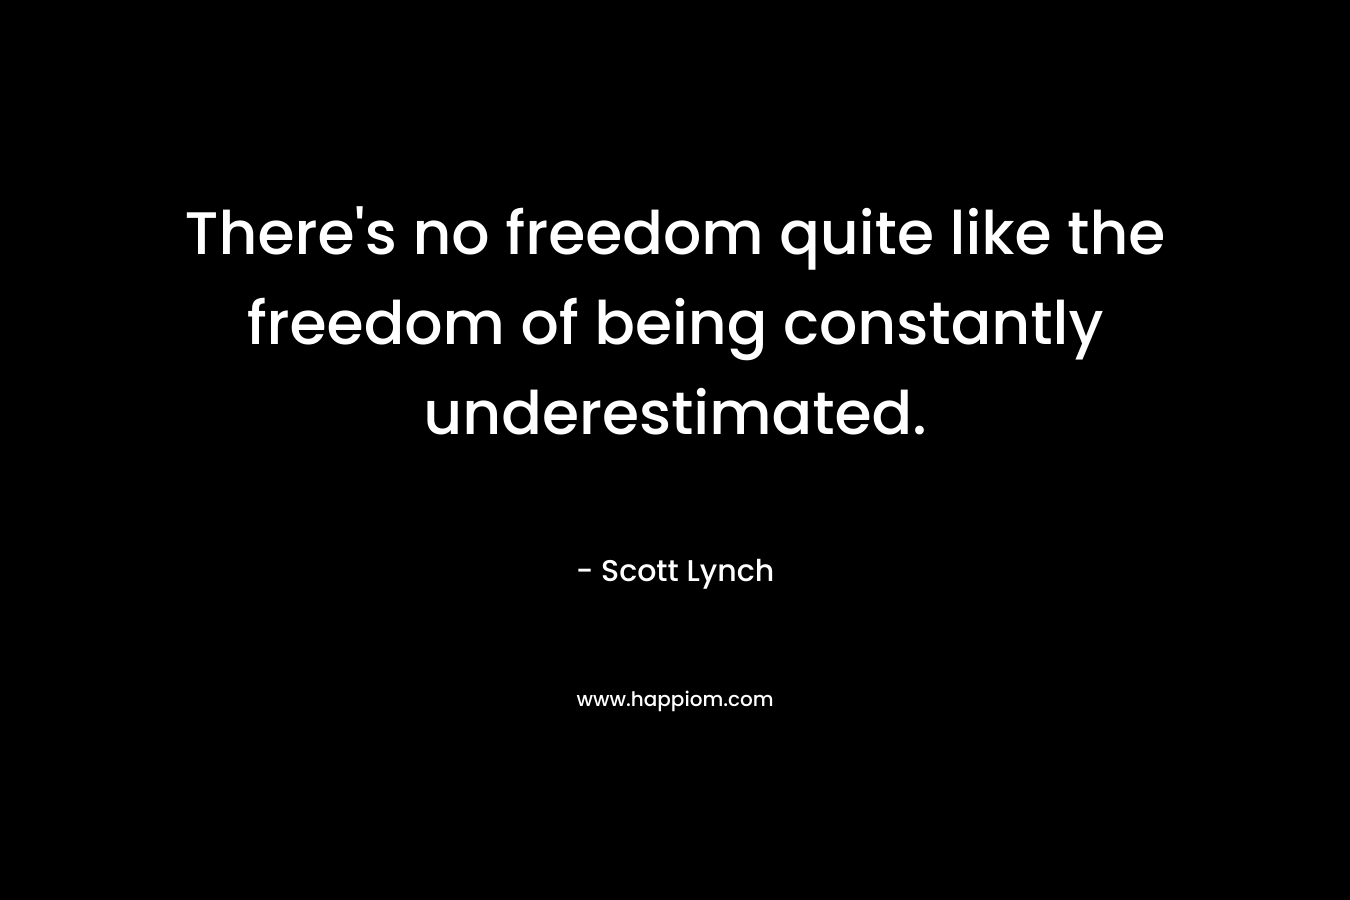 There's no freedom quite like the freedom of being constantly underestimated.